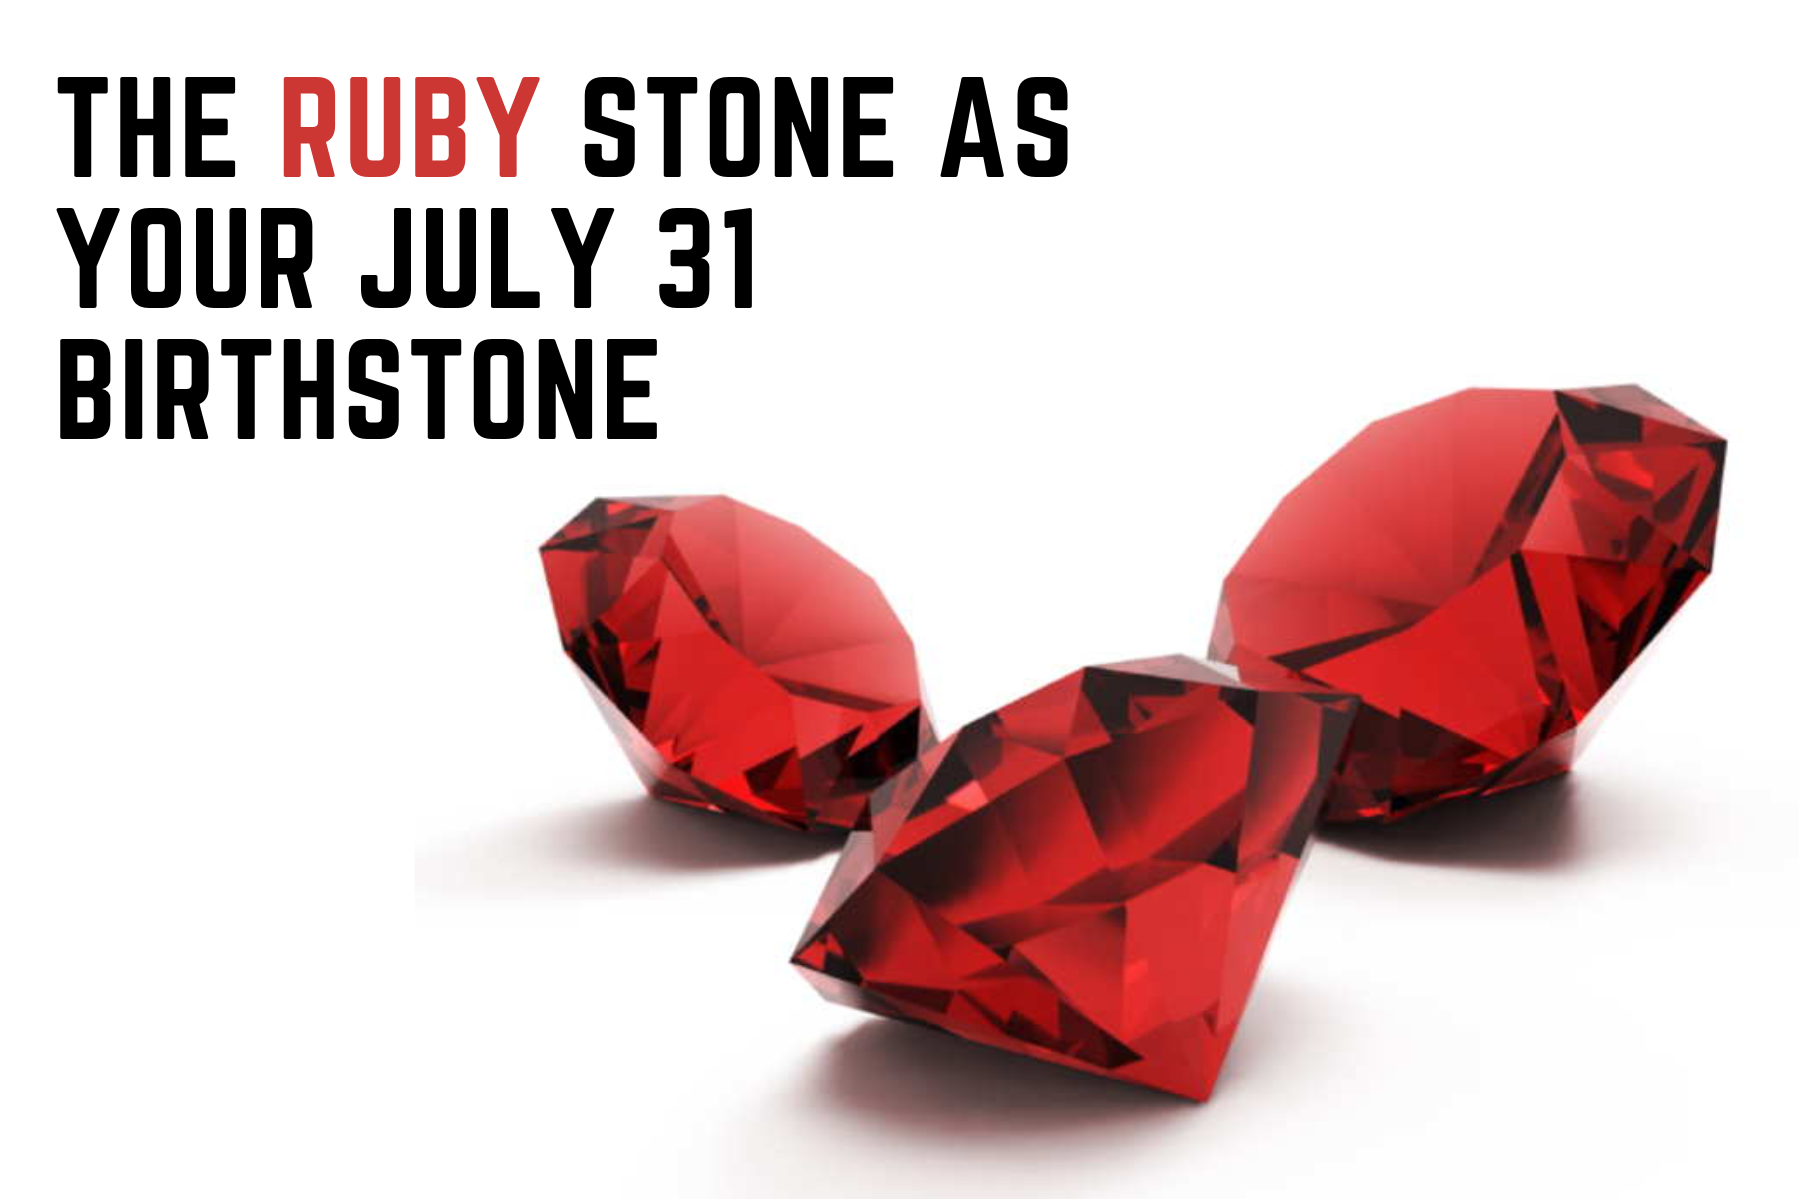 The Ruby Stone As Your July 31 Birthstone